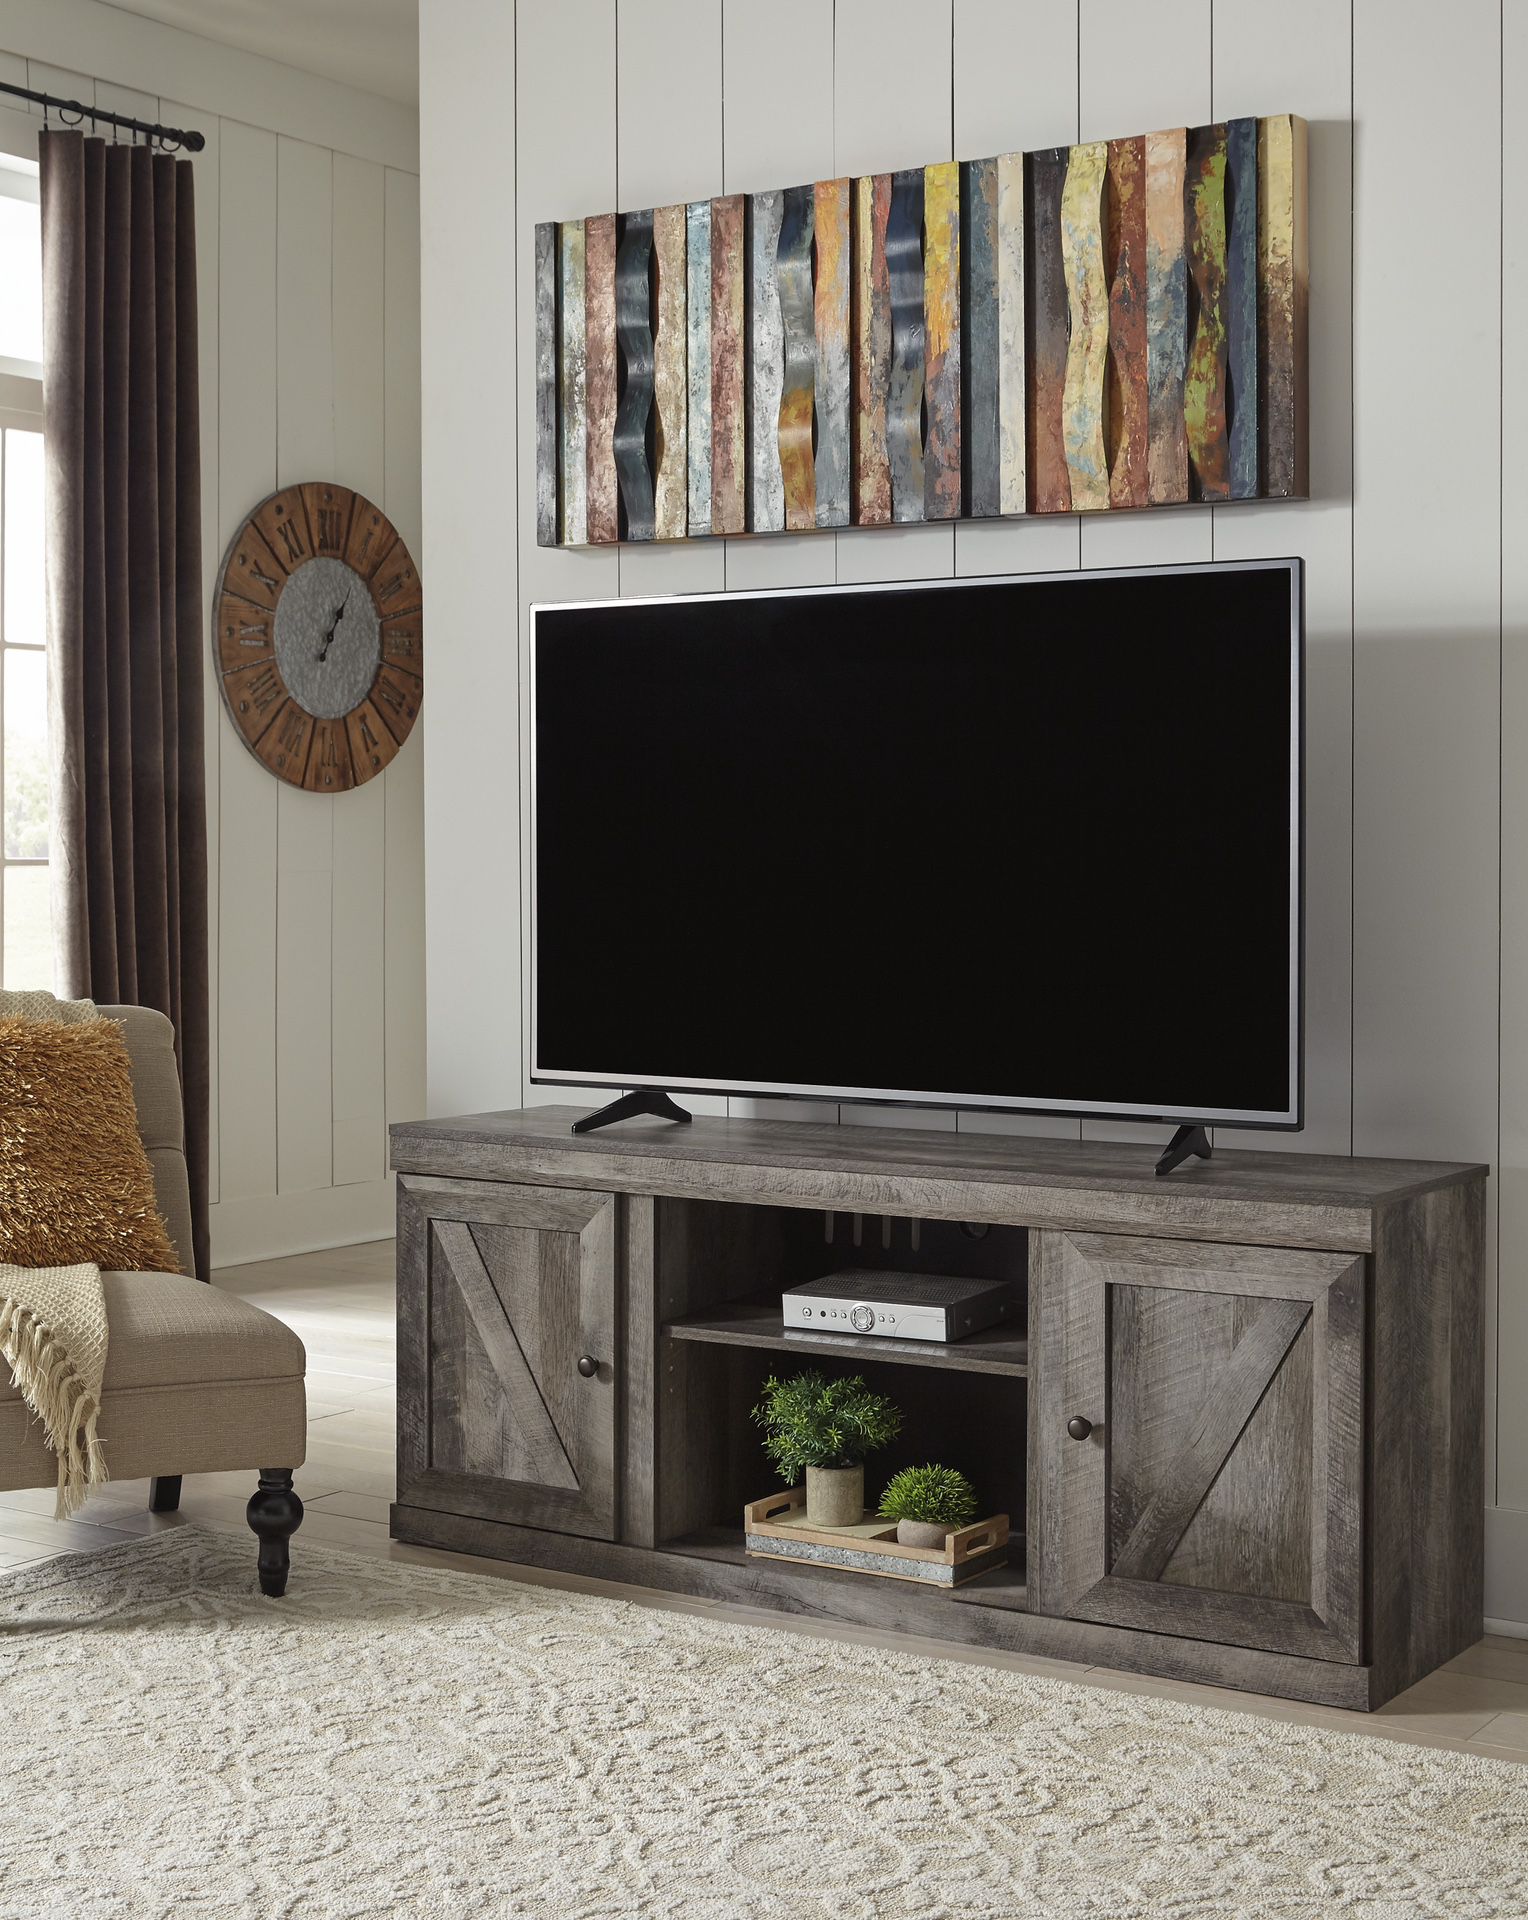 $249.99 60” TV Stand Or $599.99 With Fireplace